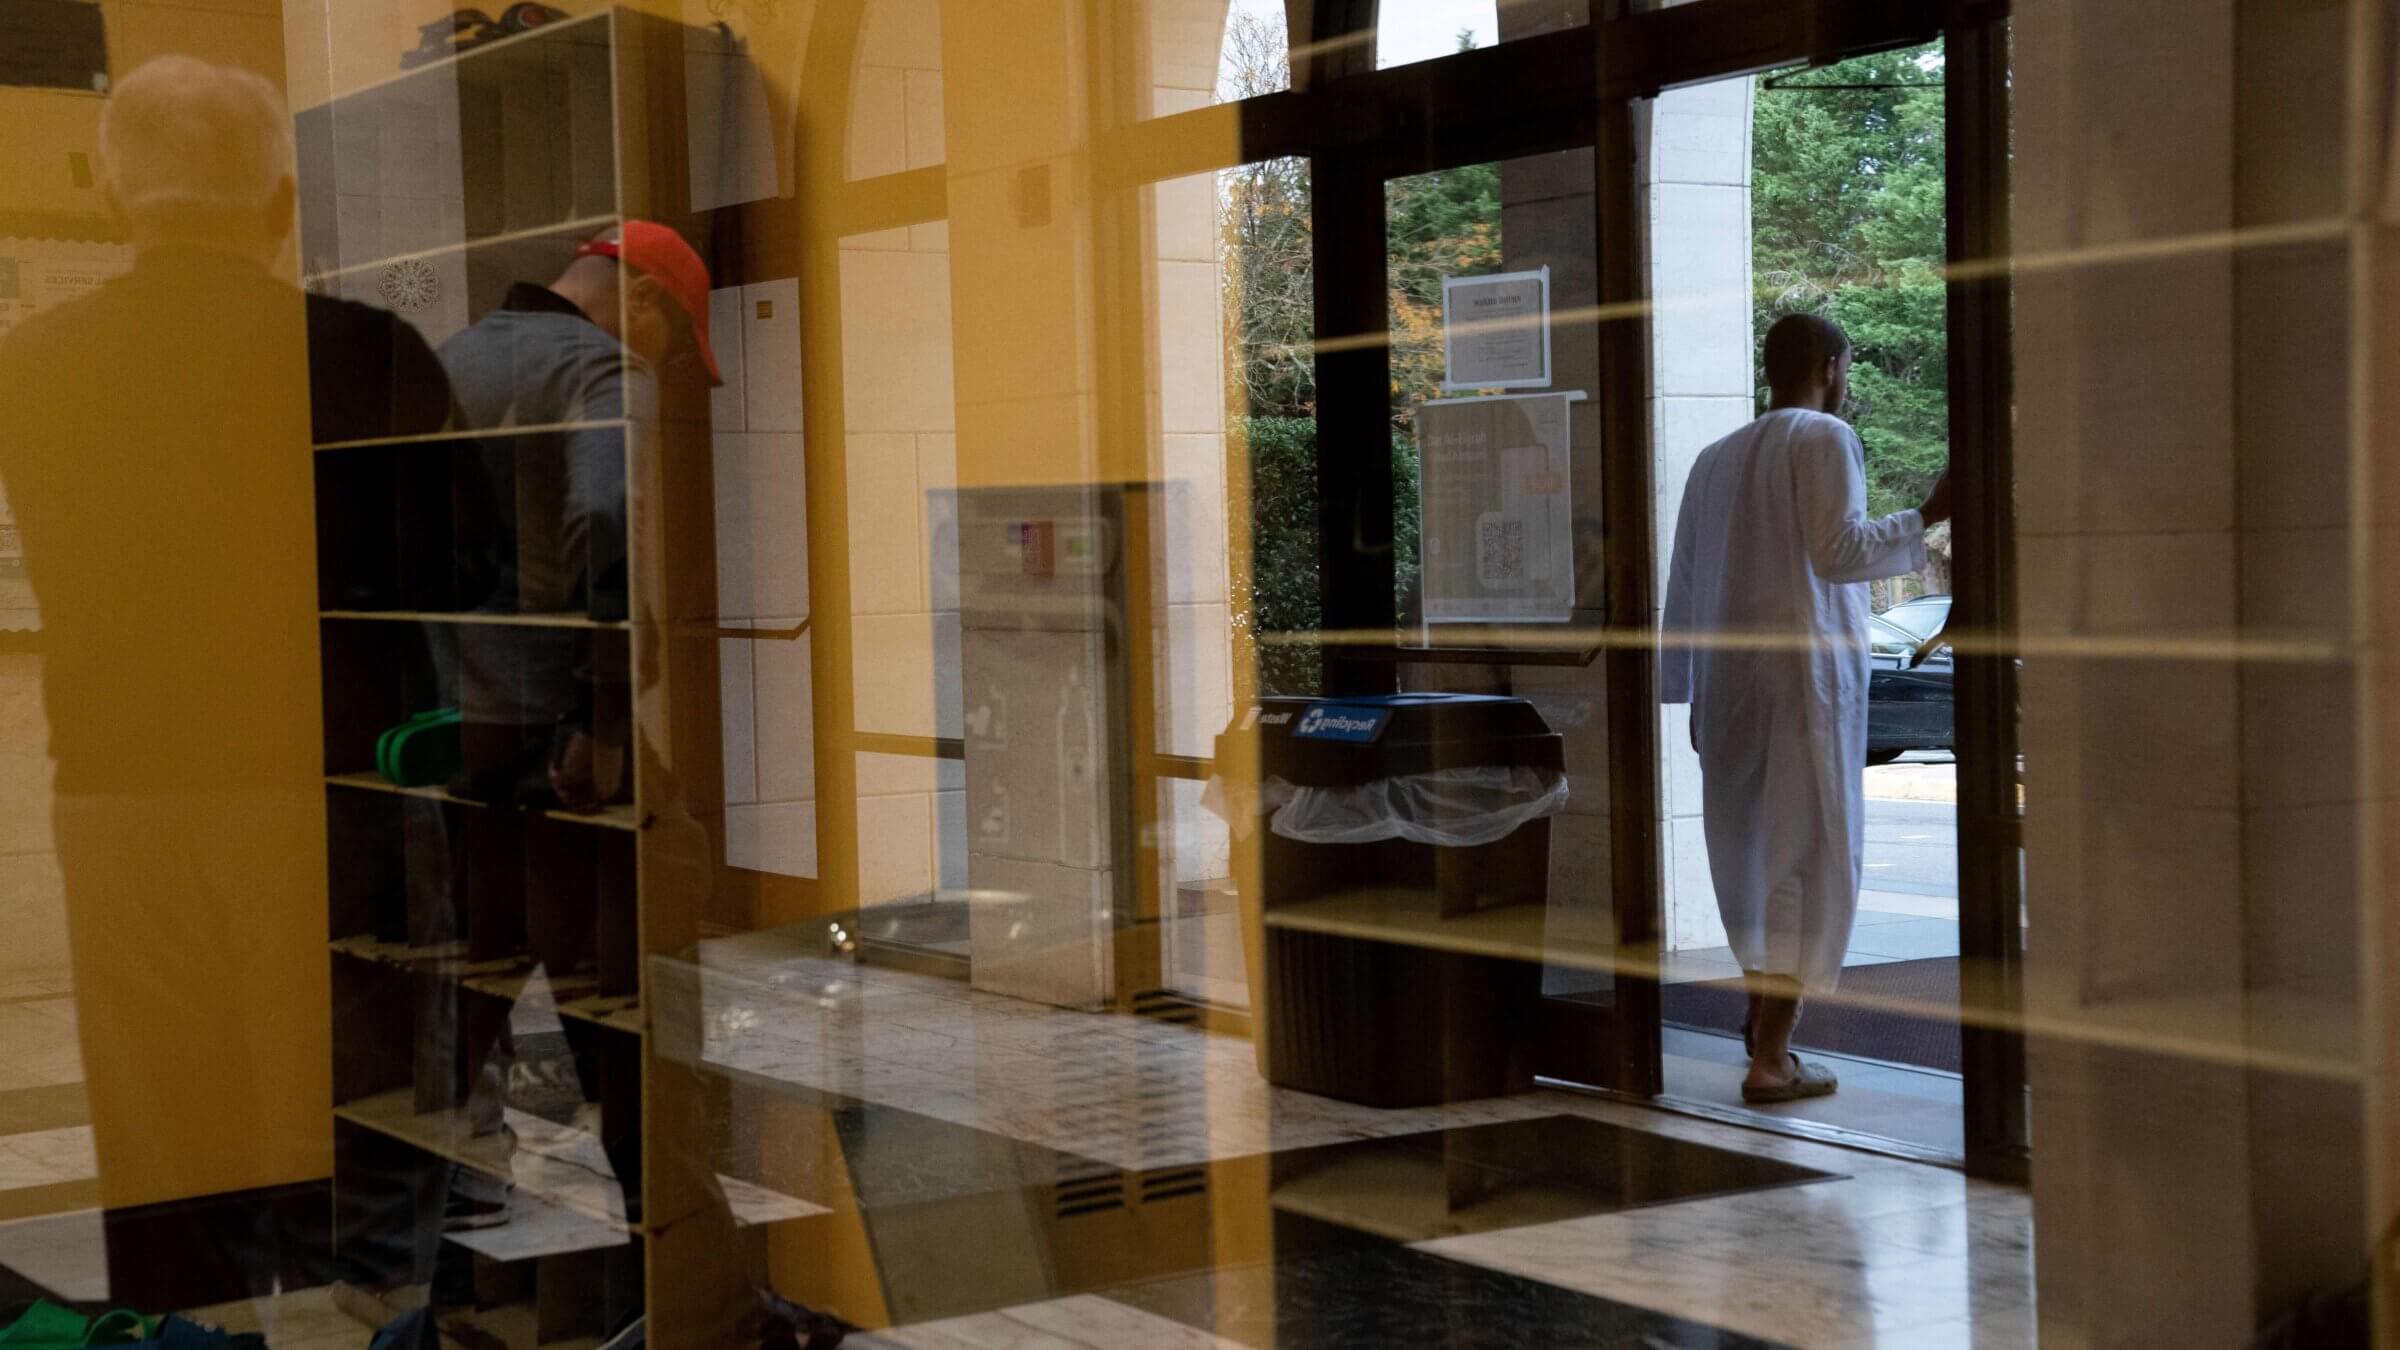 Shoes removed for prayer with congregants reflected in glass as they depart Dar Al Hijrah Islamic Center in Falls Church, Virginia, in October. The Council on American Islamic Relations Reported a surge in discrimination reports it has received since October.